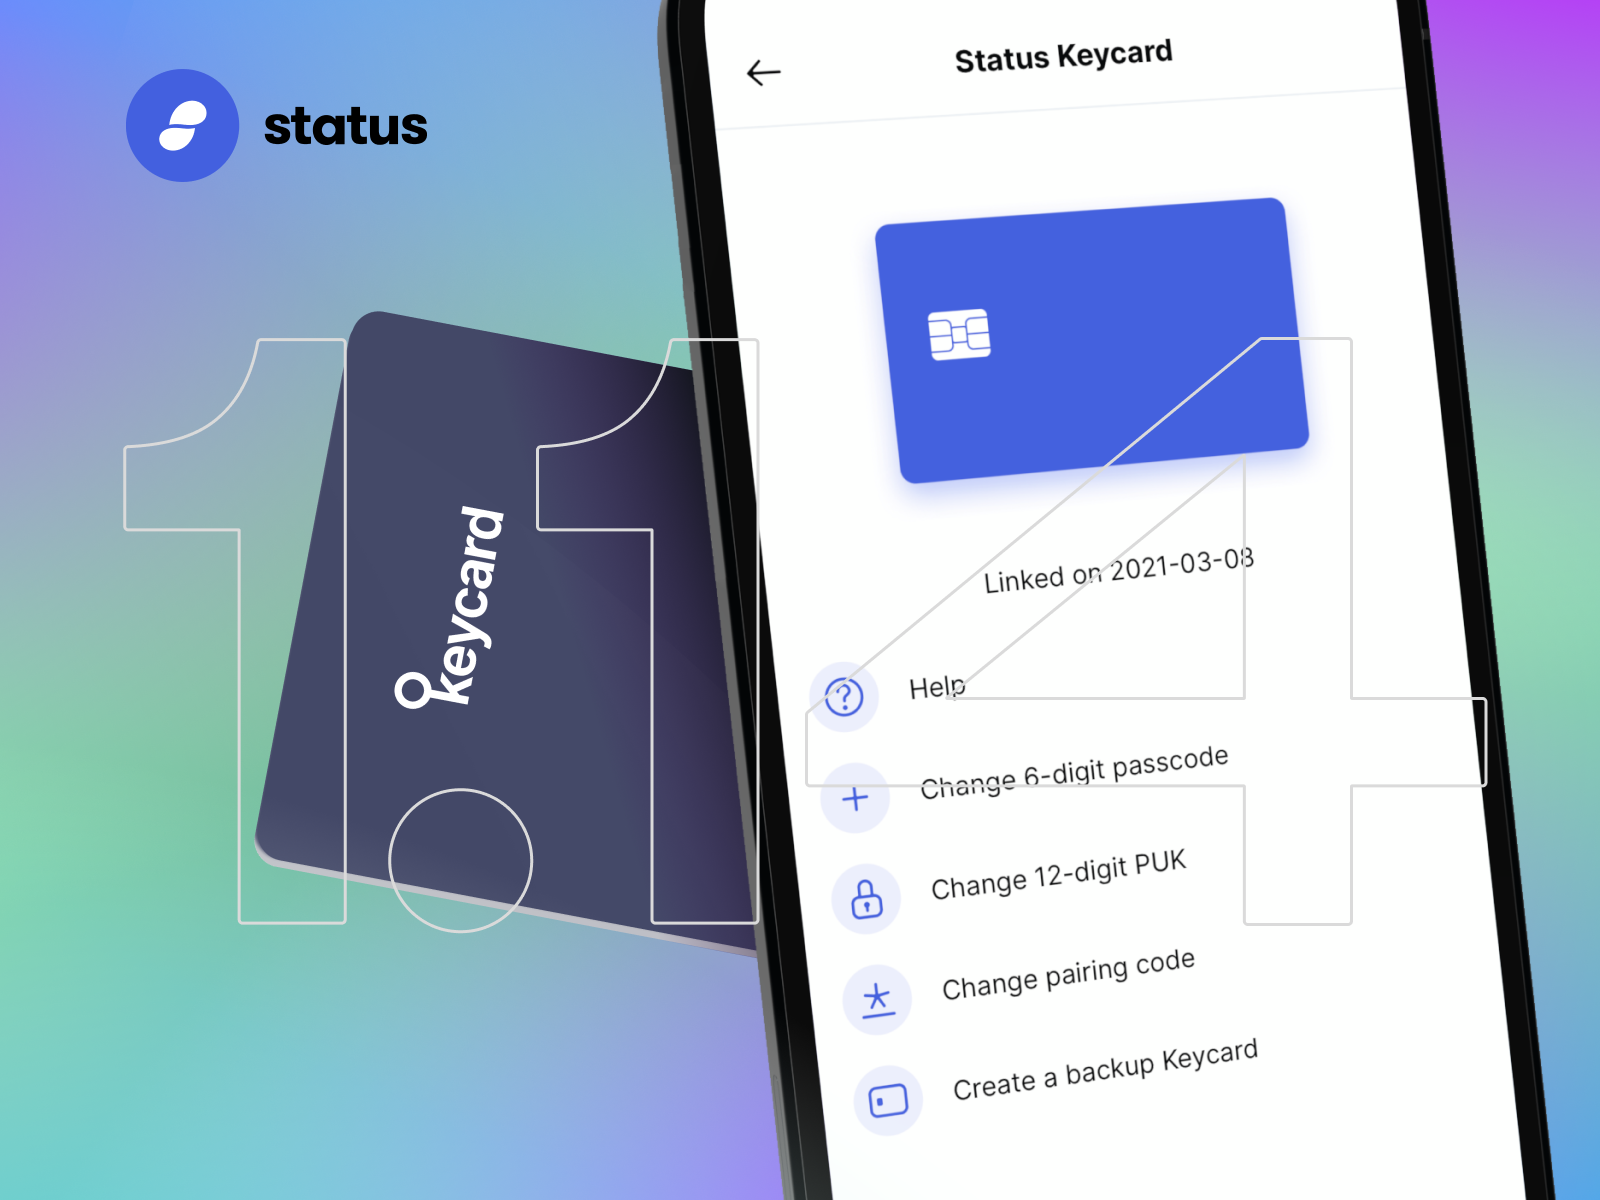 v1.14 - New Keycard Features and UX improvements